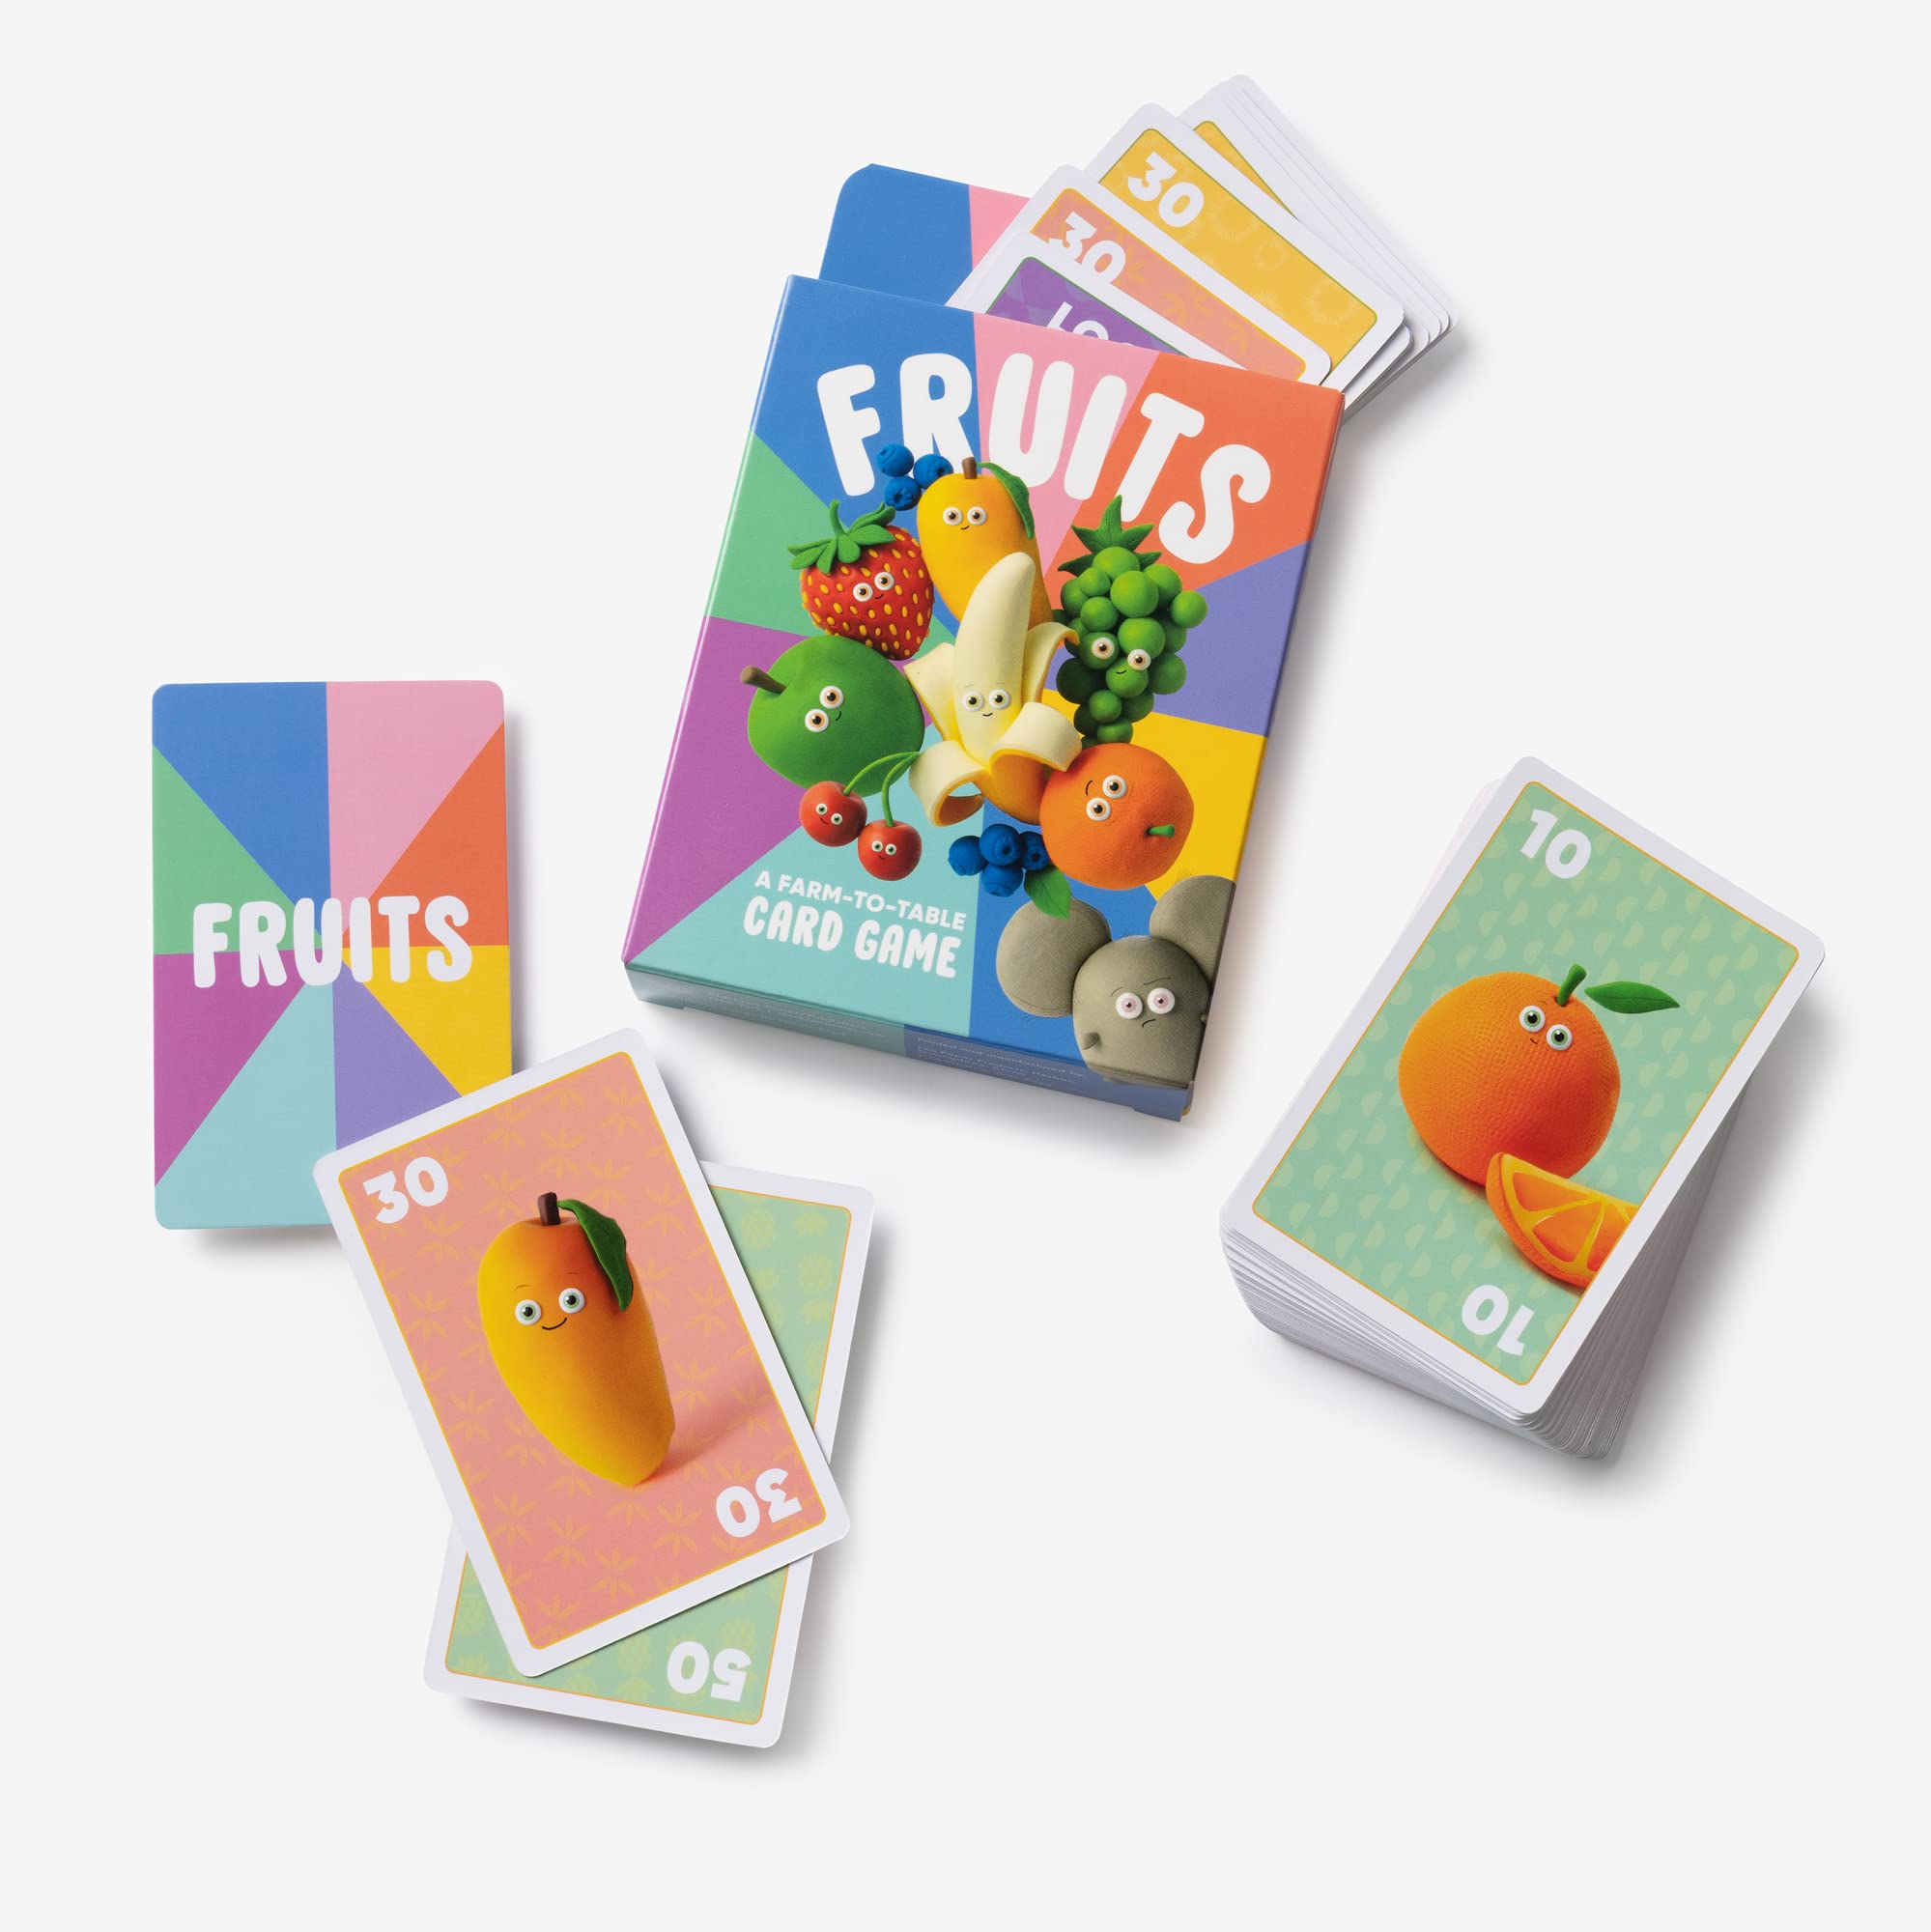 Fruits, A Farm-to-Table Card Game